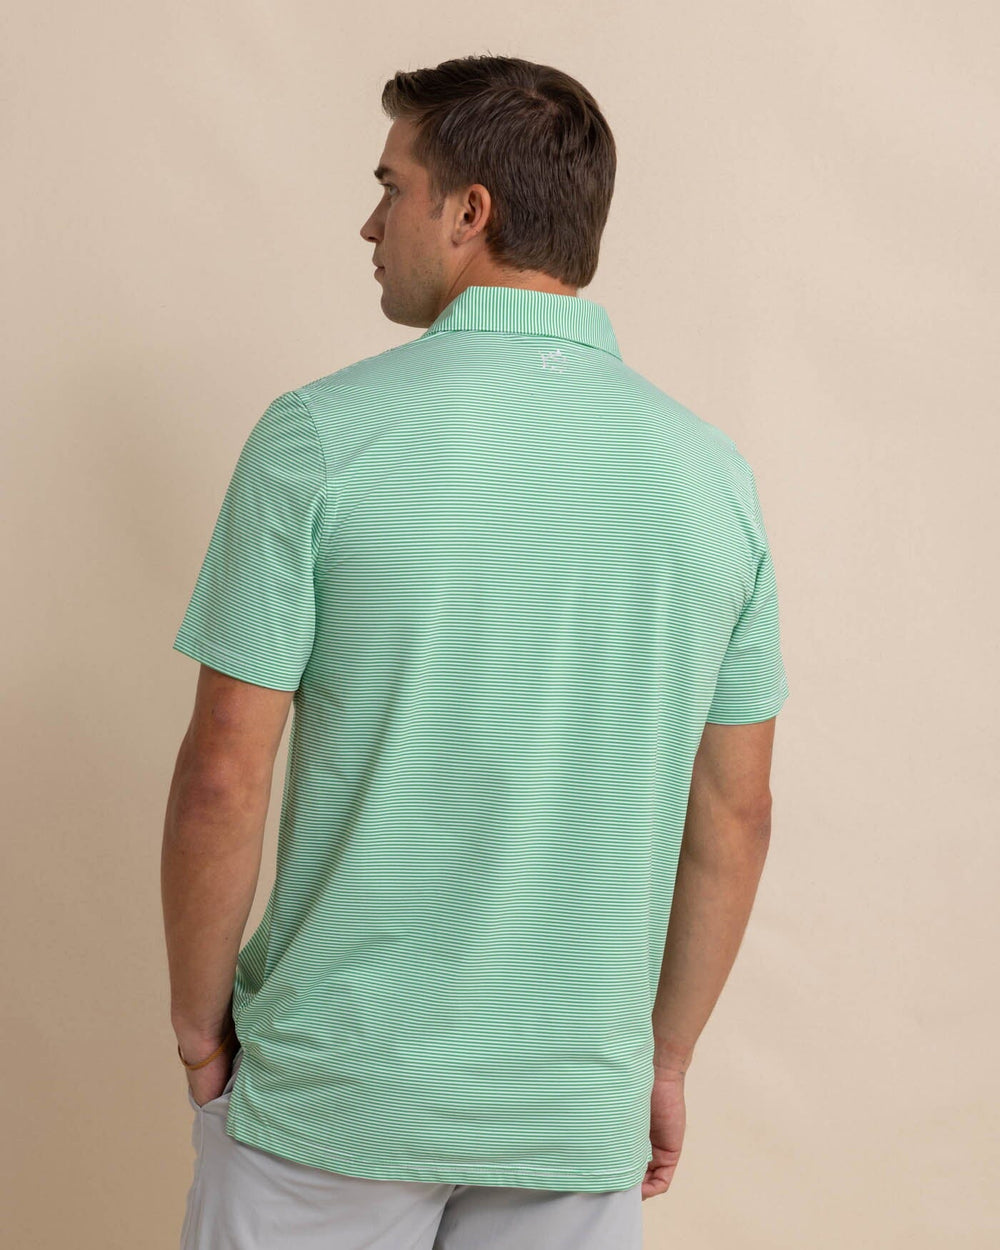 The back view of the Southern Tide brrr-eeze-meadowbrook-stripe-polo by Southern Tide - Lawn Green